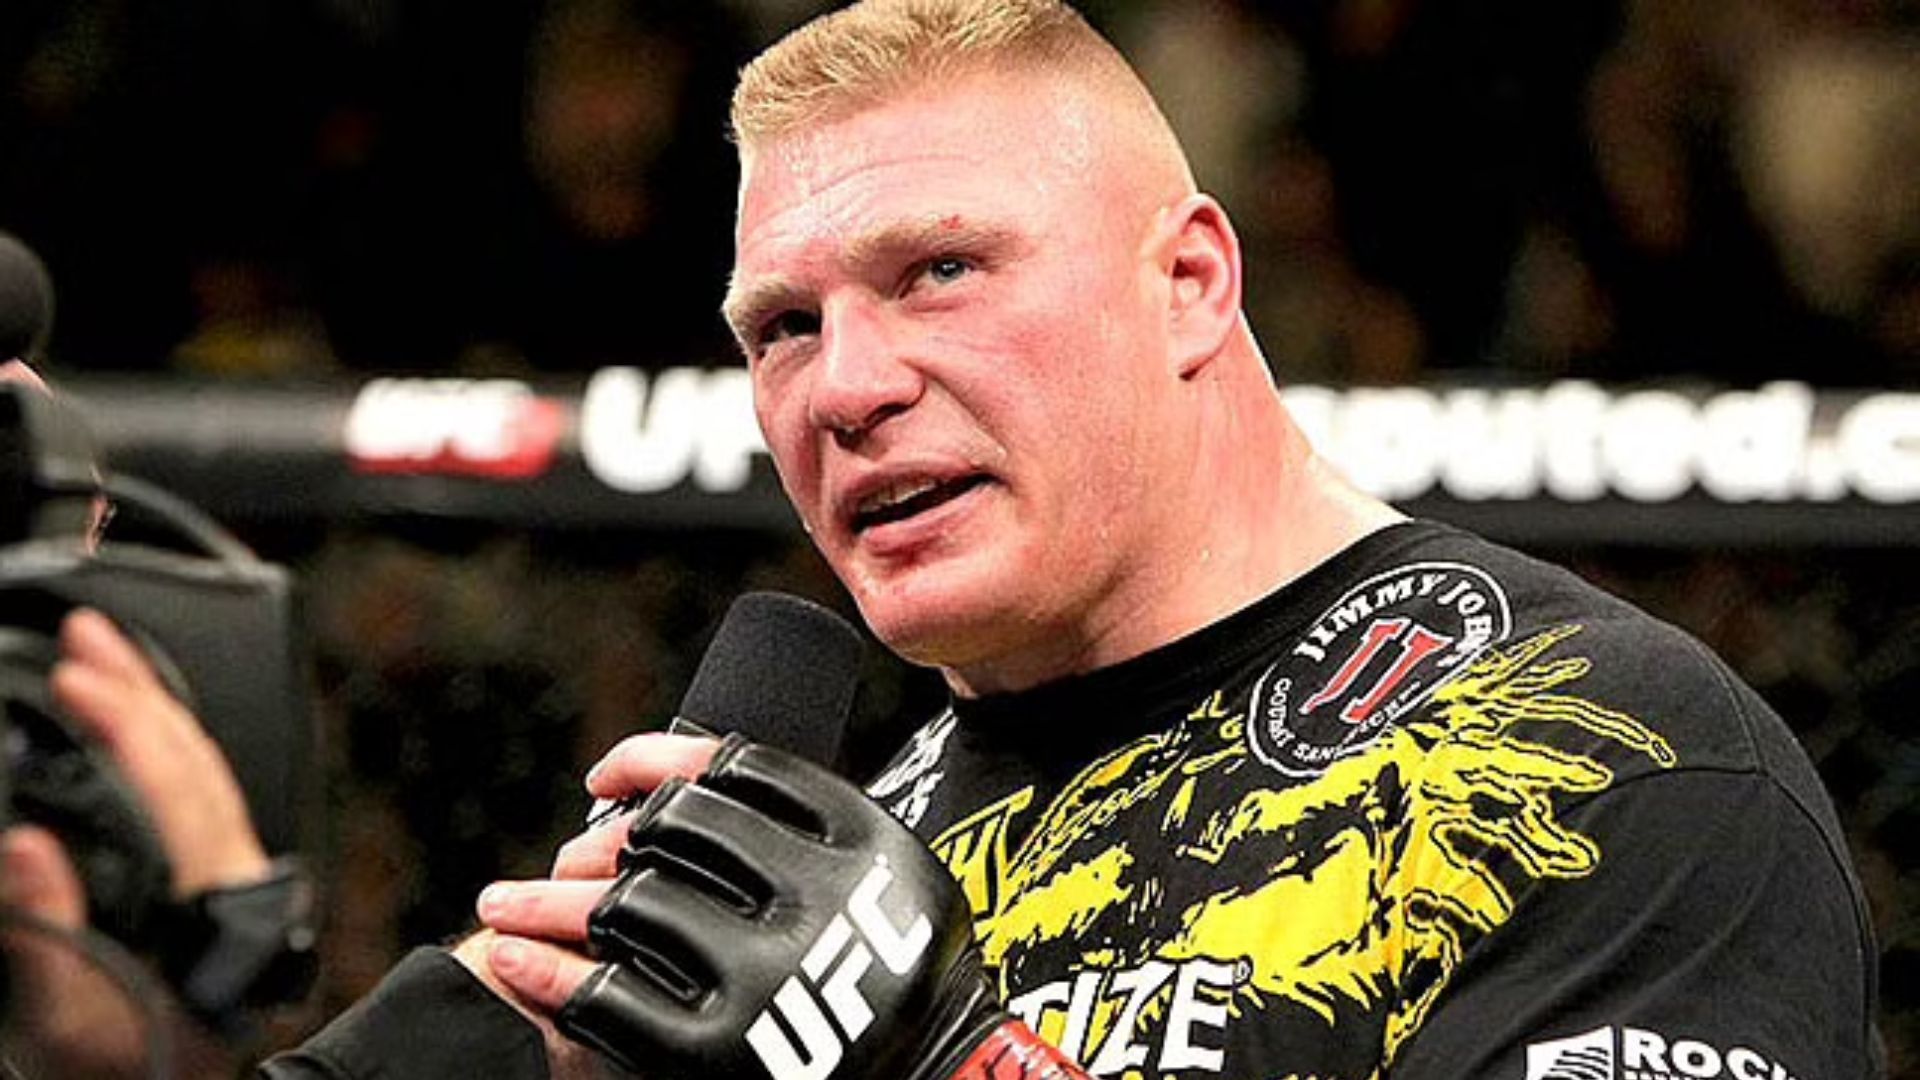 Lesnar topped the salary list for MMA fighters in 2011